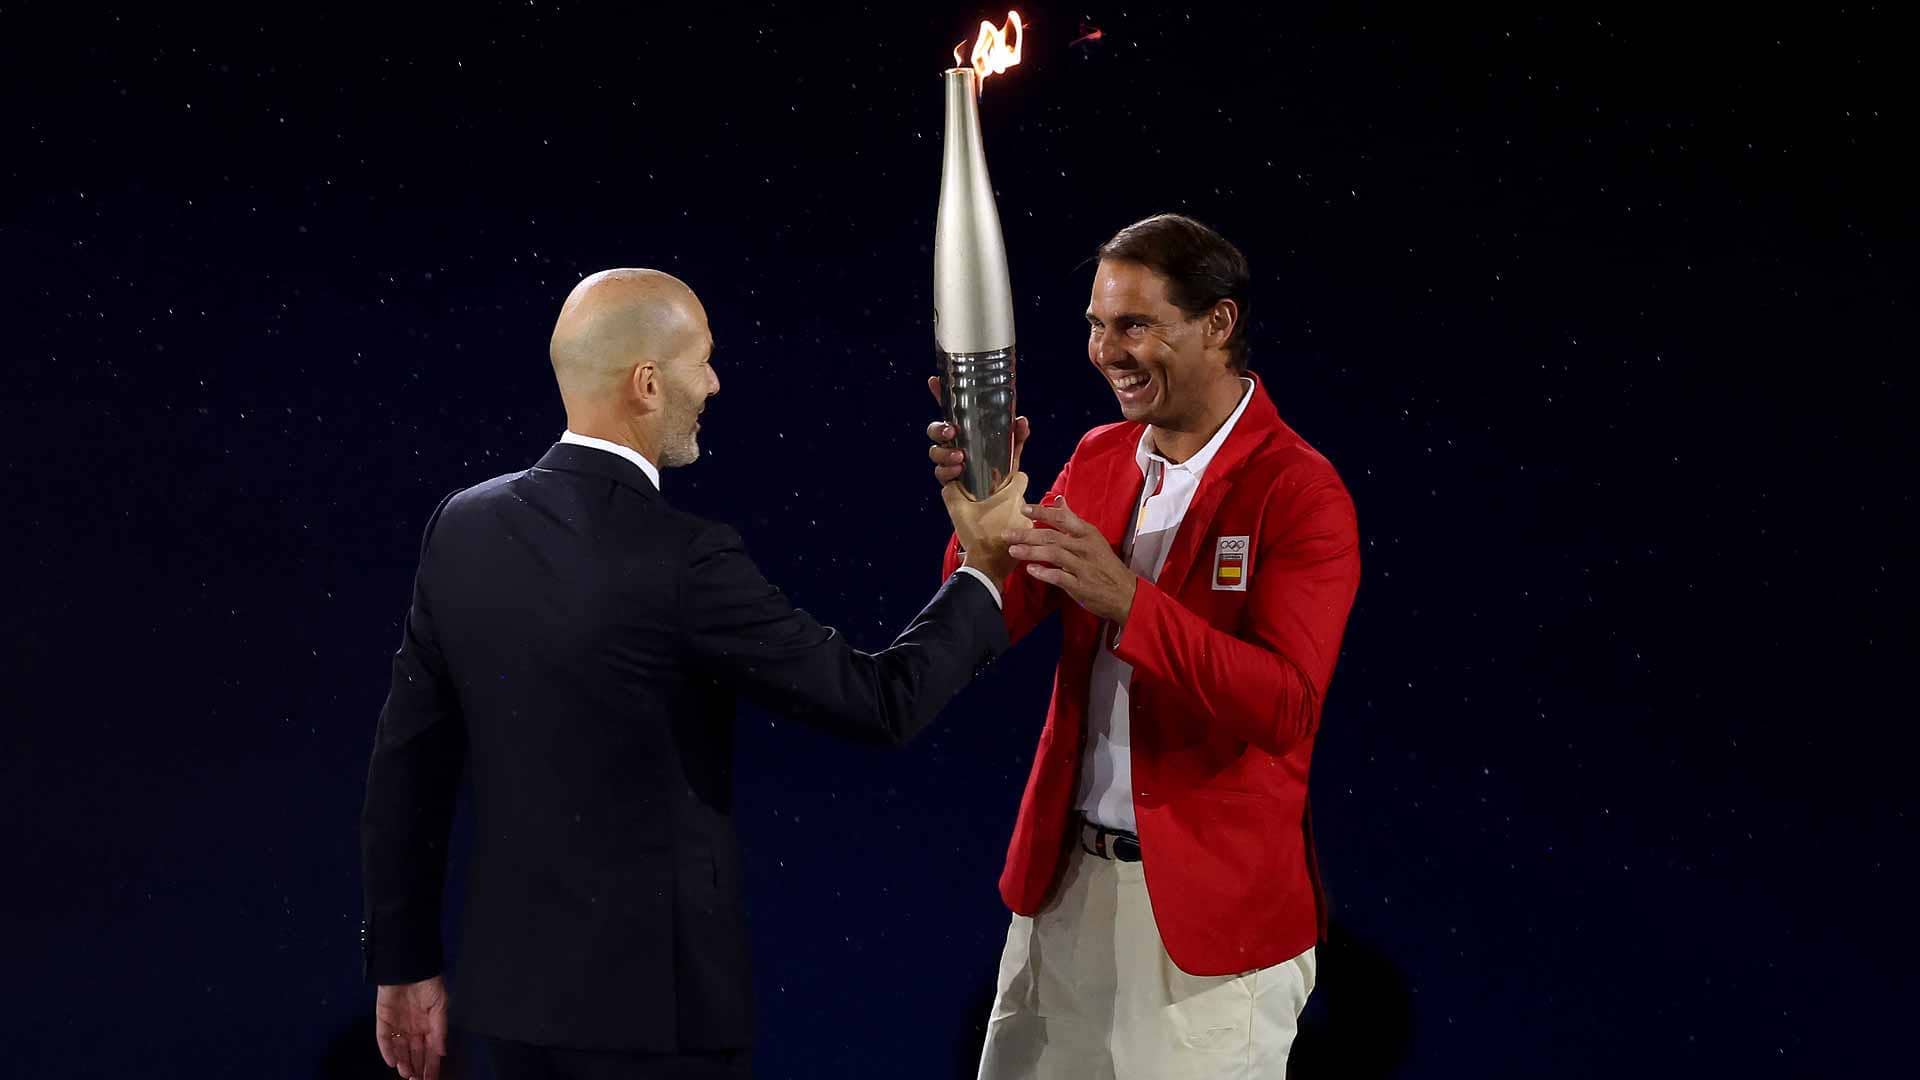 Zinedine Zidane hands the Olympic Torch to <a href='https://www.atptour.com/en/players/rafael-nadal/n409/overview'>Rafael Nadal</a> during Friday evening's Opening Ceremony in Paris.